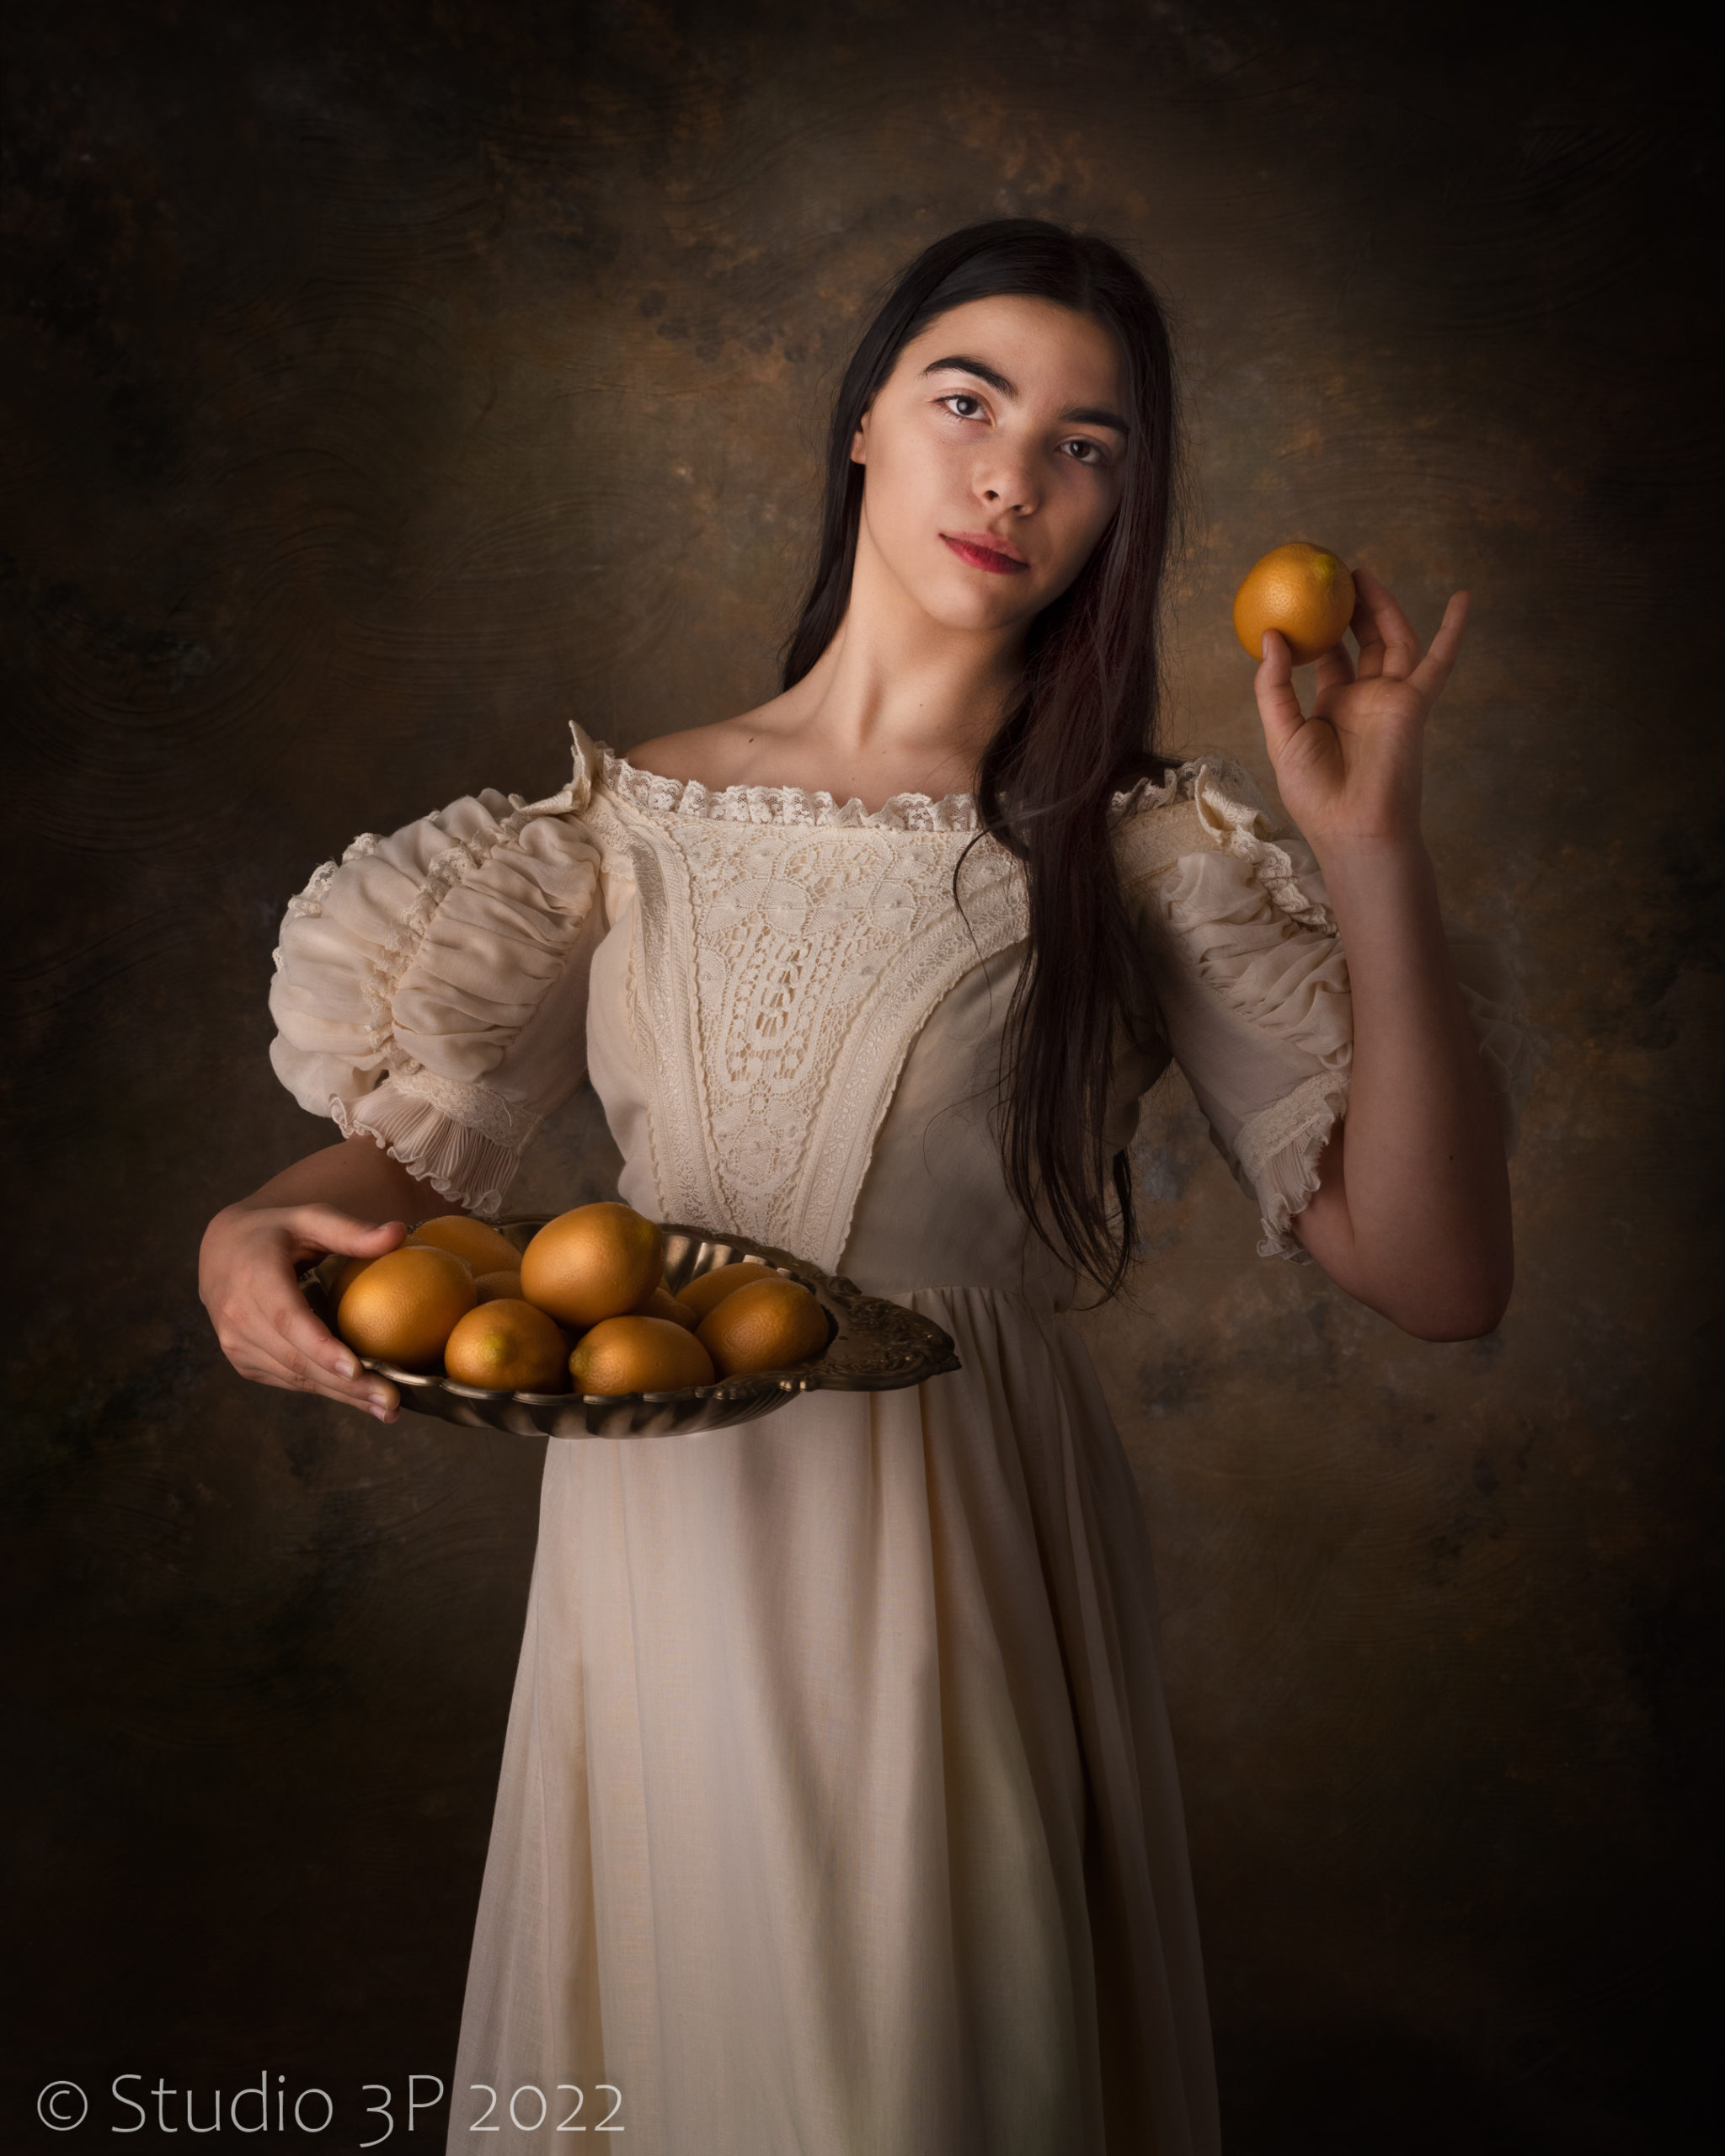 Elegant woman poses with pears in white cream dress